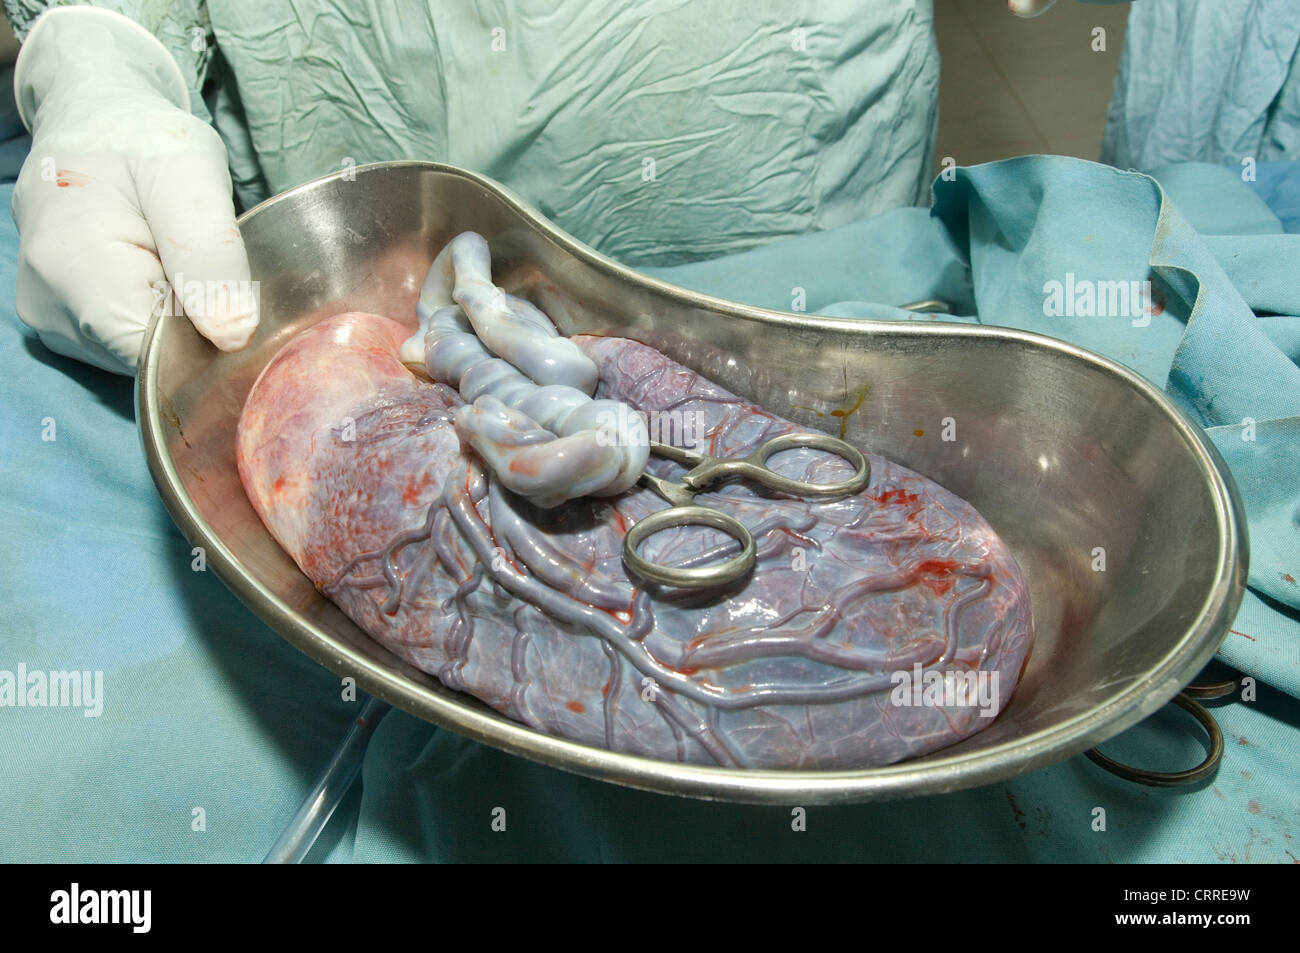 Human placenta in a kidney dish, following its removal after a cesarean delivery. Stock Photo